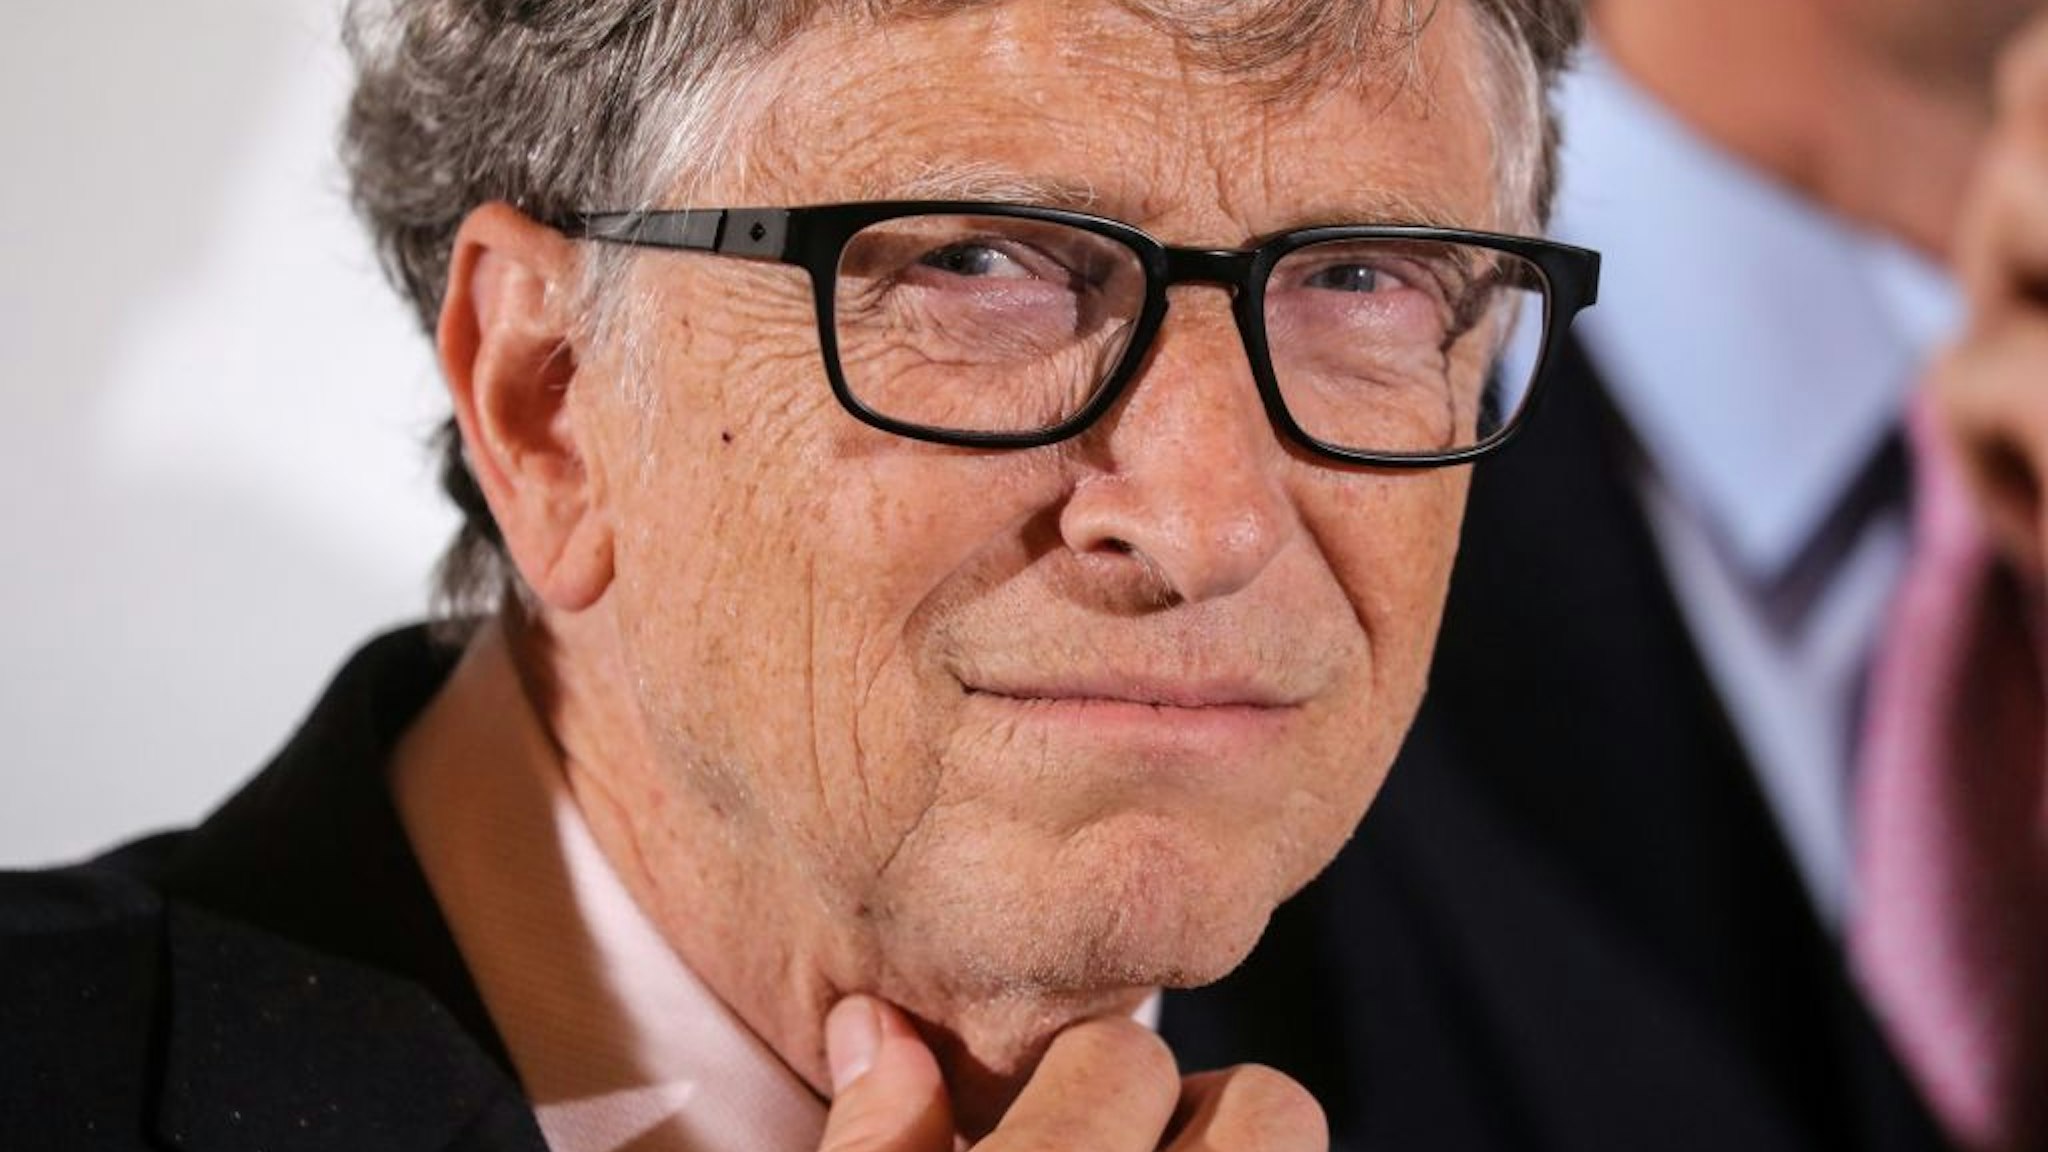 Microsoft founder, Co-Chairman of the Bill & Melinda Gates Foundation, Bill Gates poses during a photocall at the start of the funding conference of Global Fund to Fight AIDS, Tuberculosis and Malaria, Lyon's city hall, central eastern France, on October 9, 2019. (Photo by LUDOVIC MARIN/AFP via Getty Images)